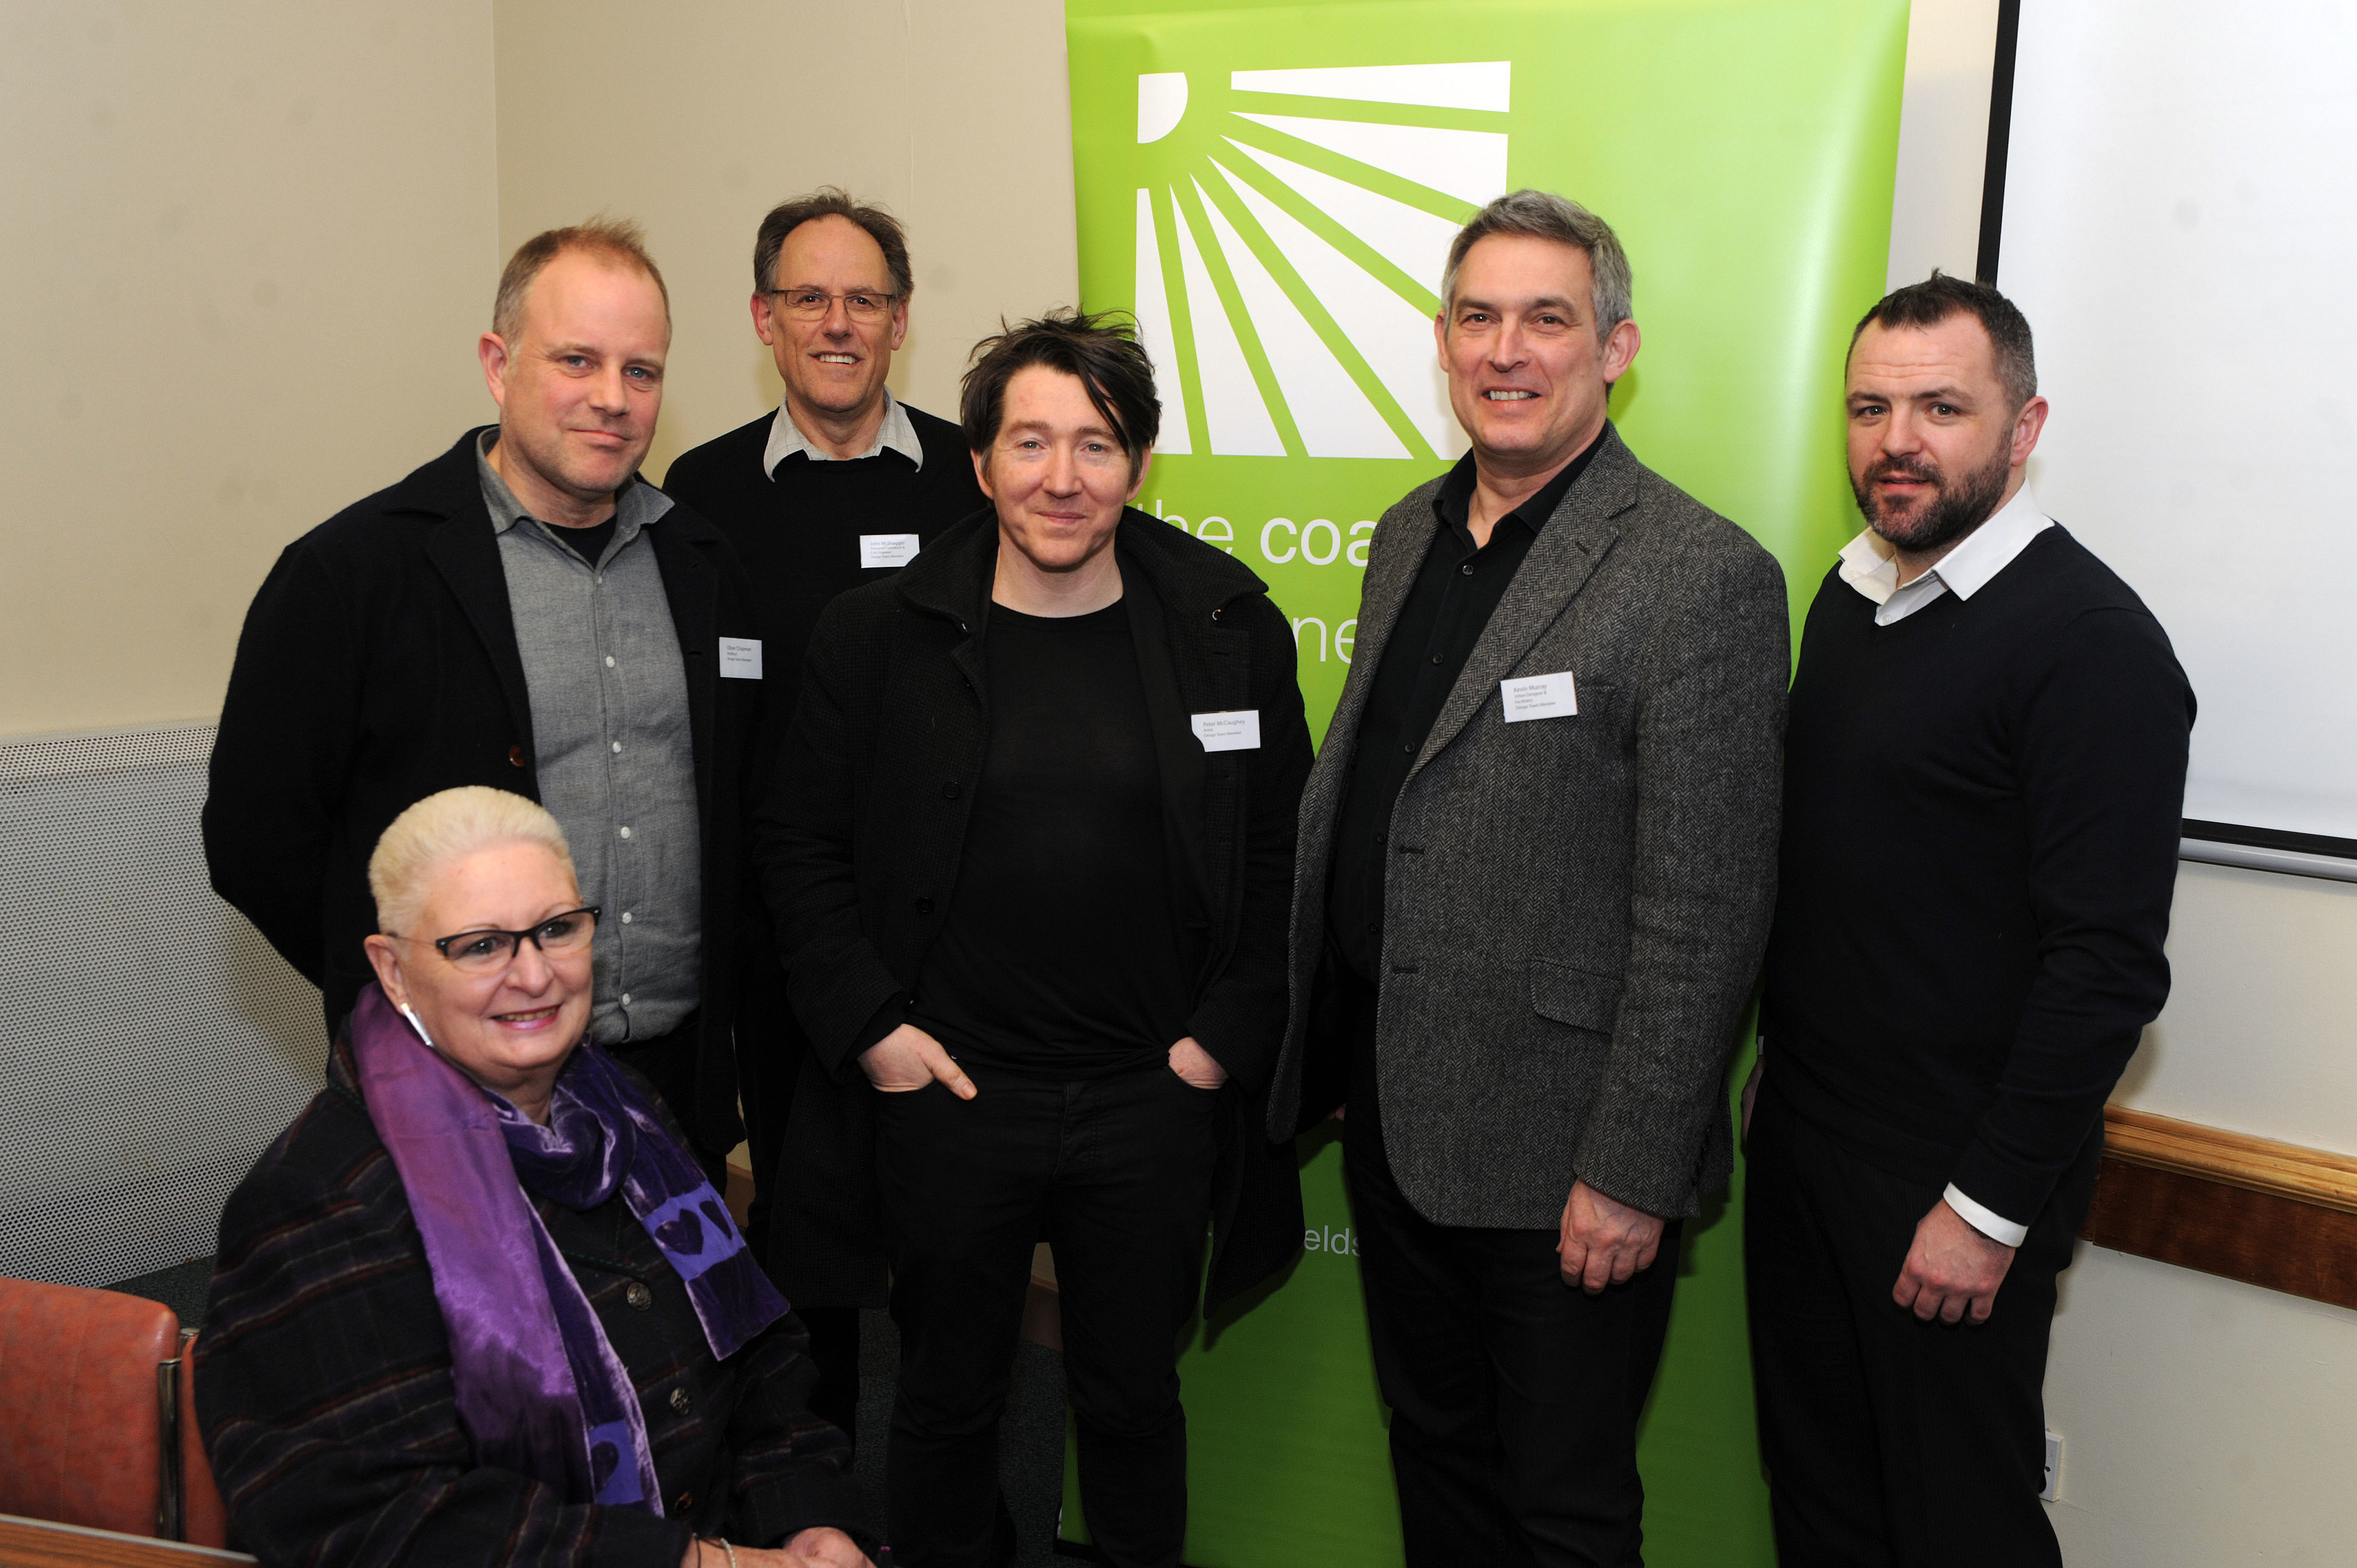 Oliver Chapman, John McIlhager, Peter McCaughey, Keven Murray, Gary Potter and Pauline Douglas at the opening meeting